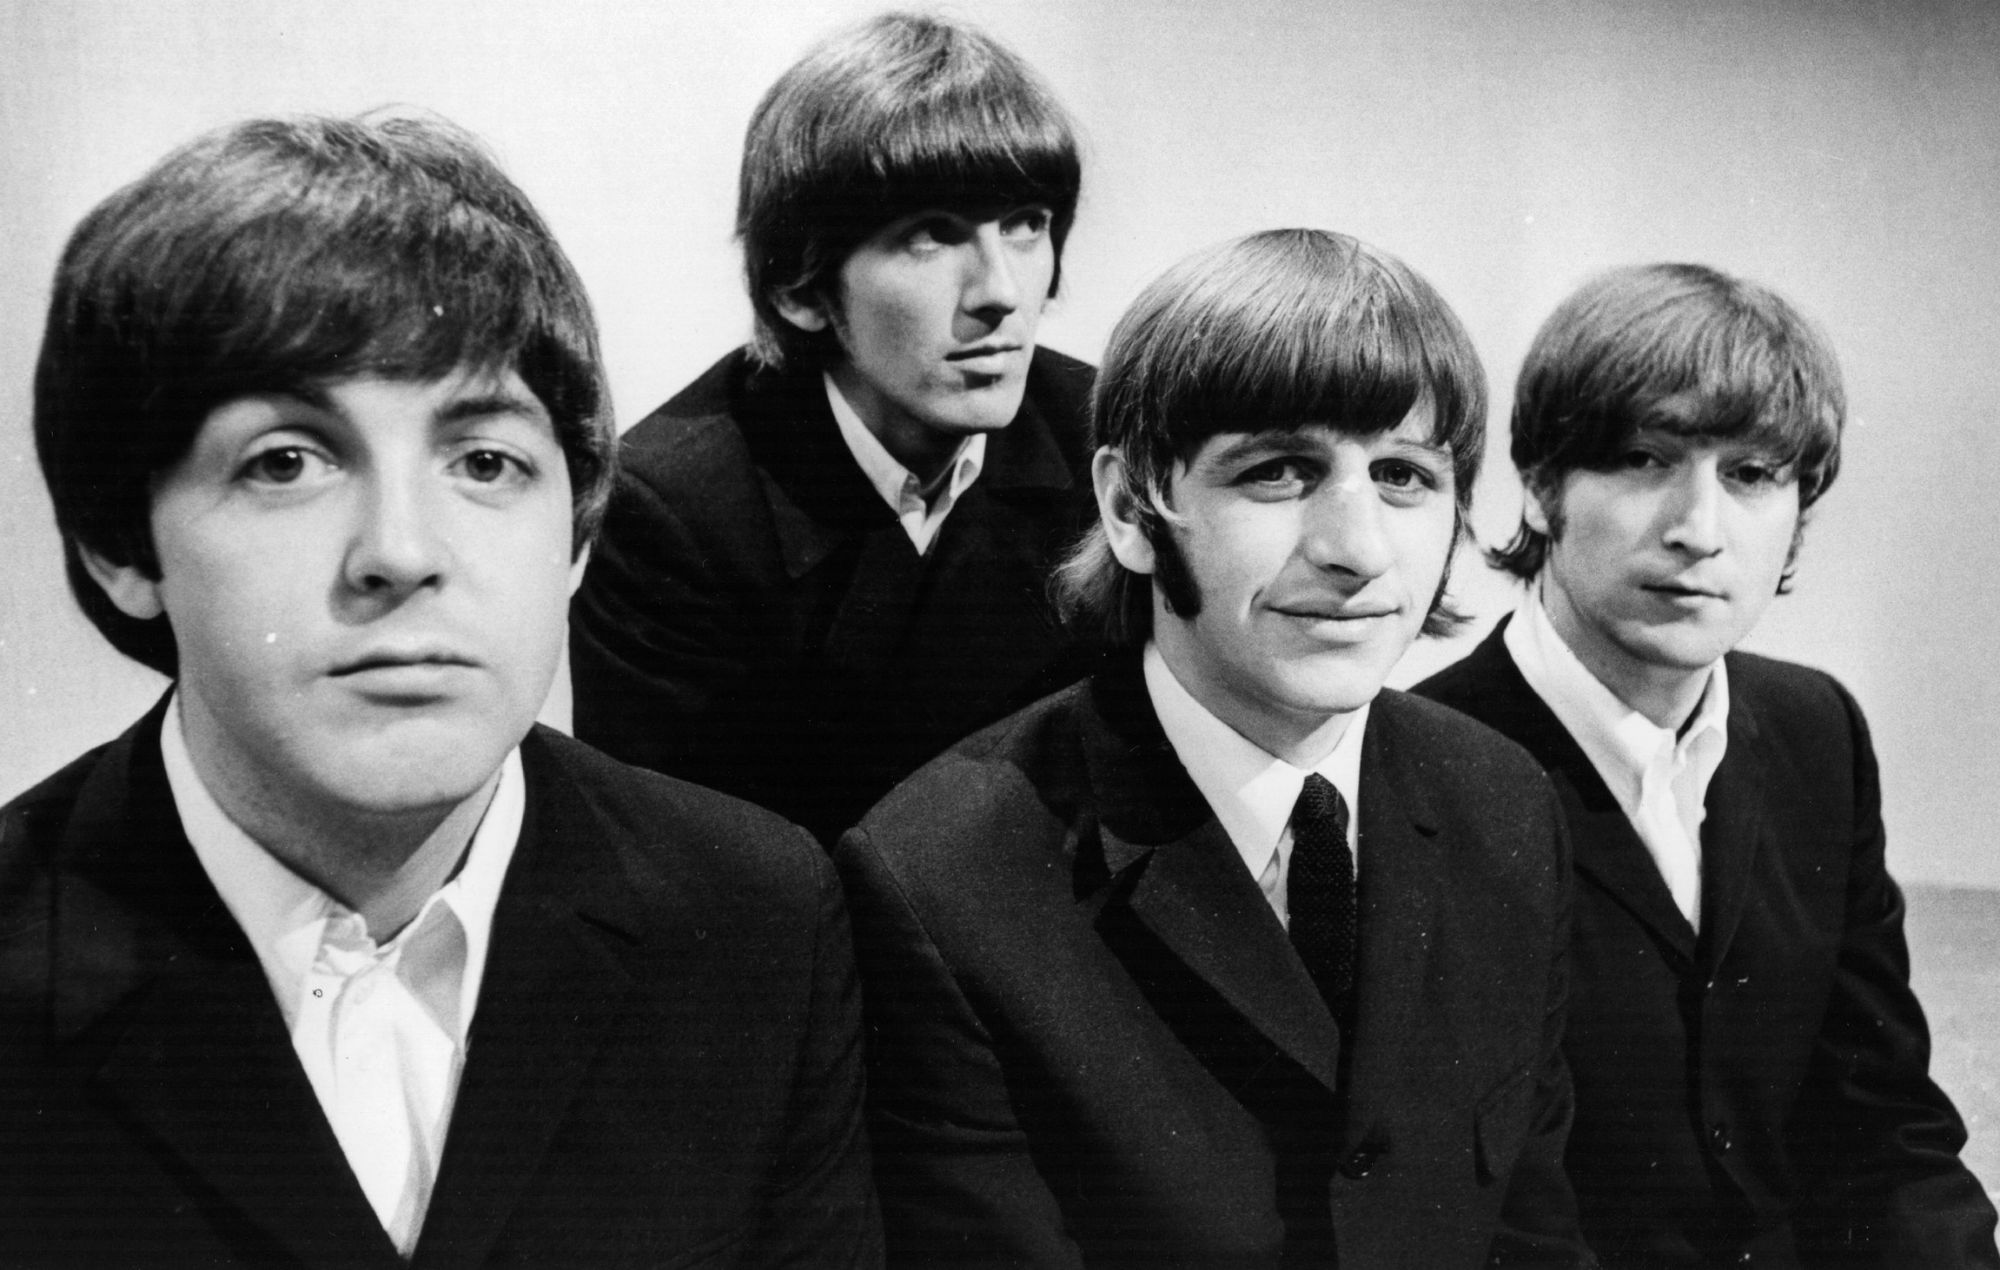 The Beatles’ music added to YouTube Shorts